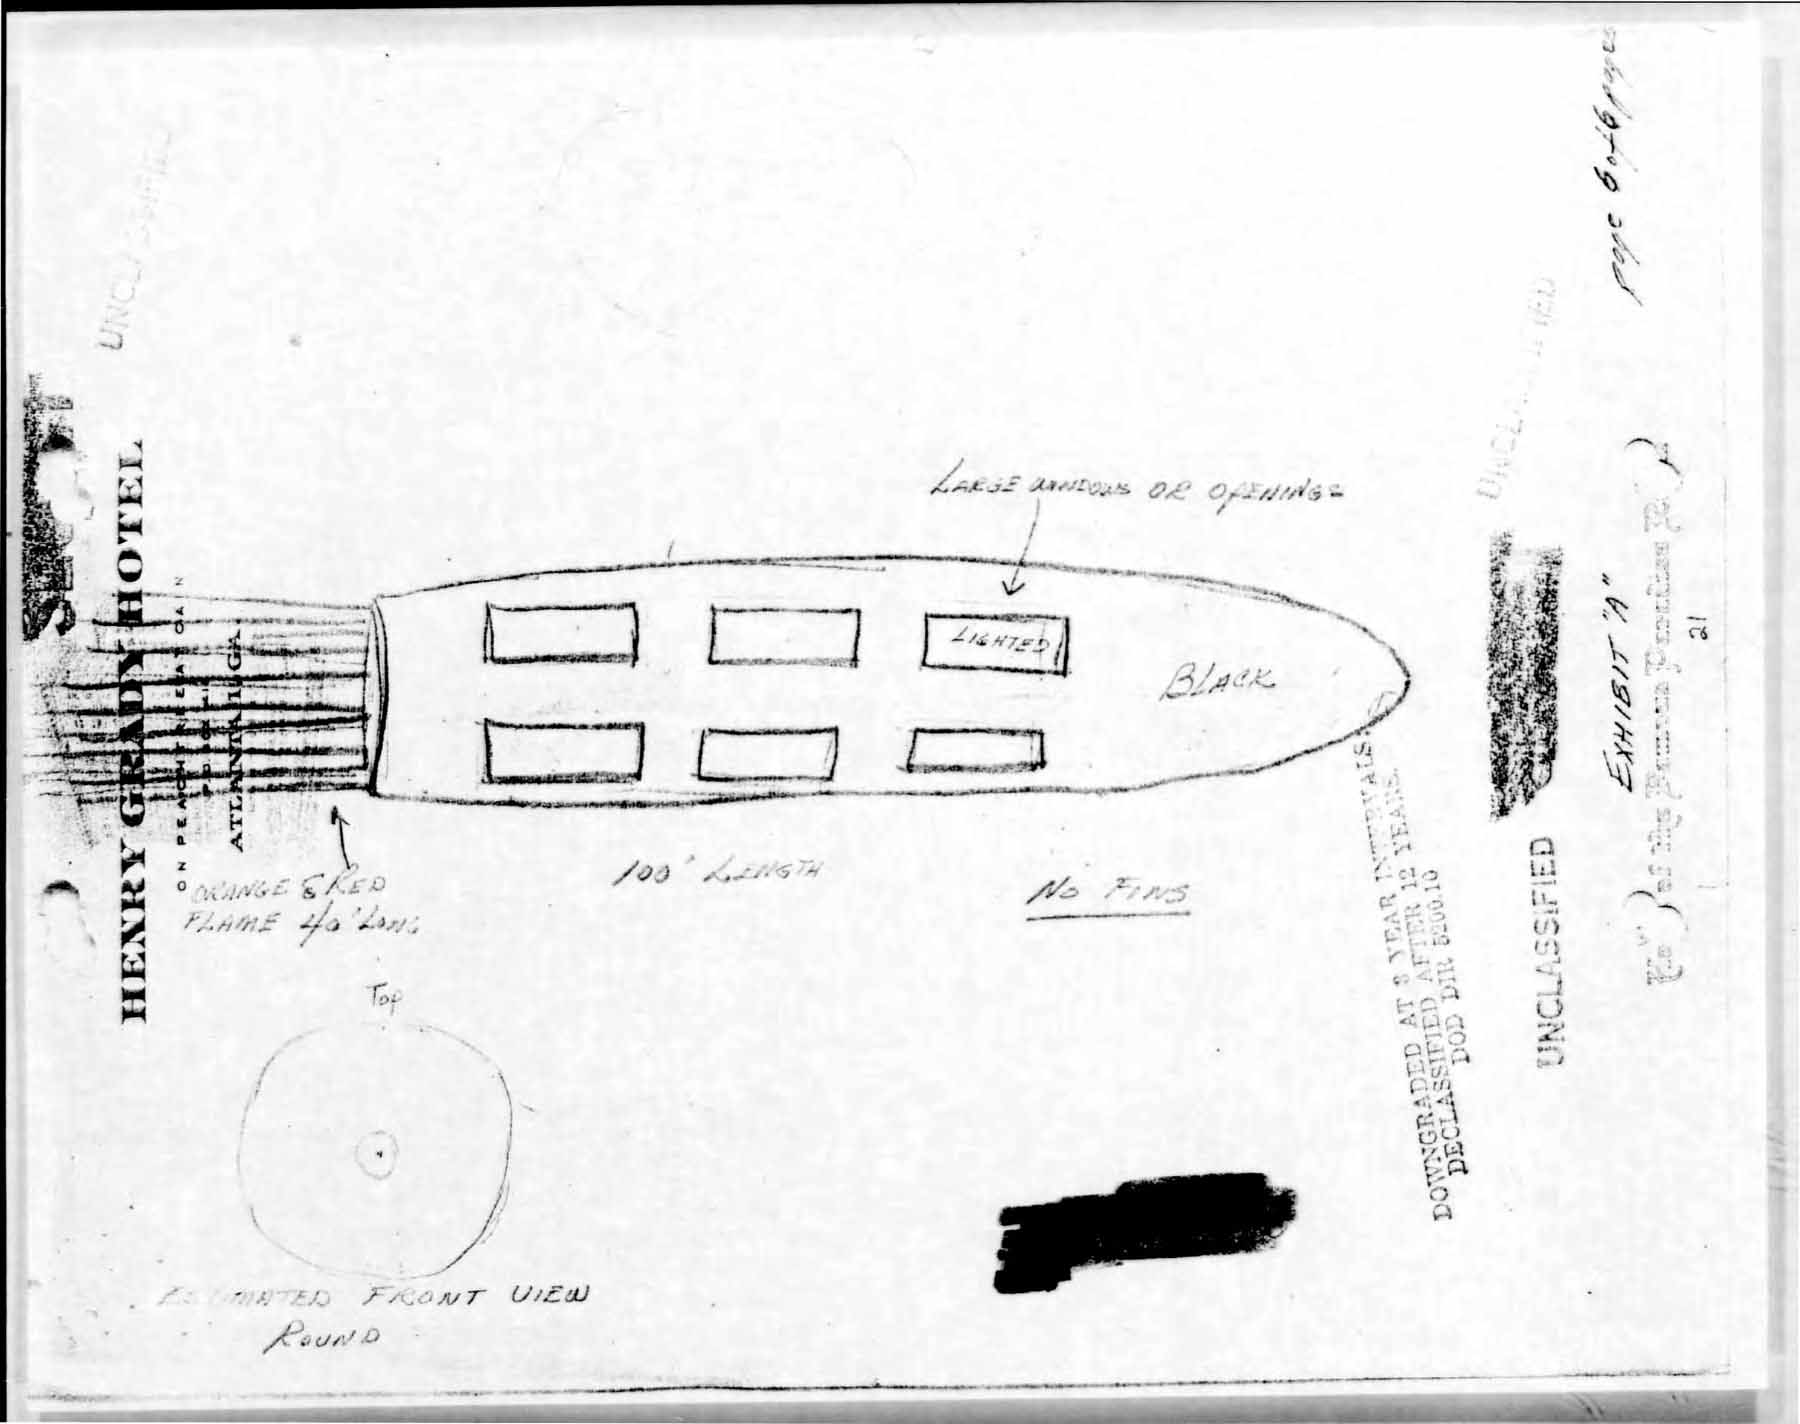 Sketch of object witnessed by First Officer and Co-pilot Whitted, made at an Atlanta hotel on July 26.